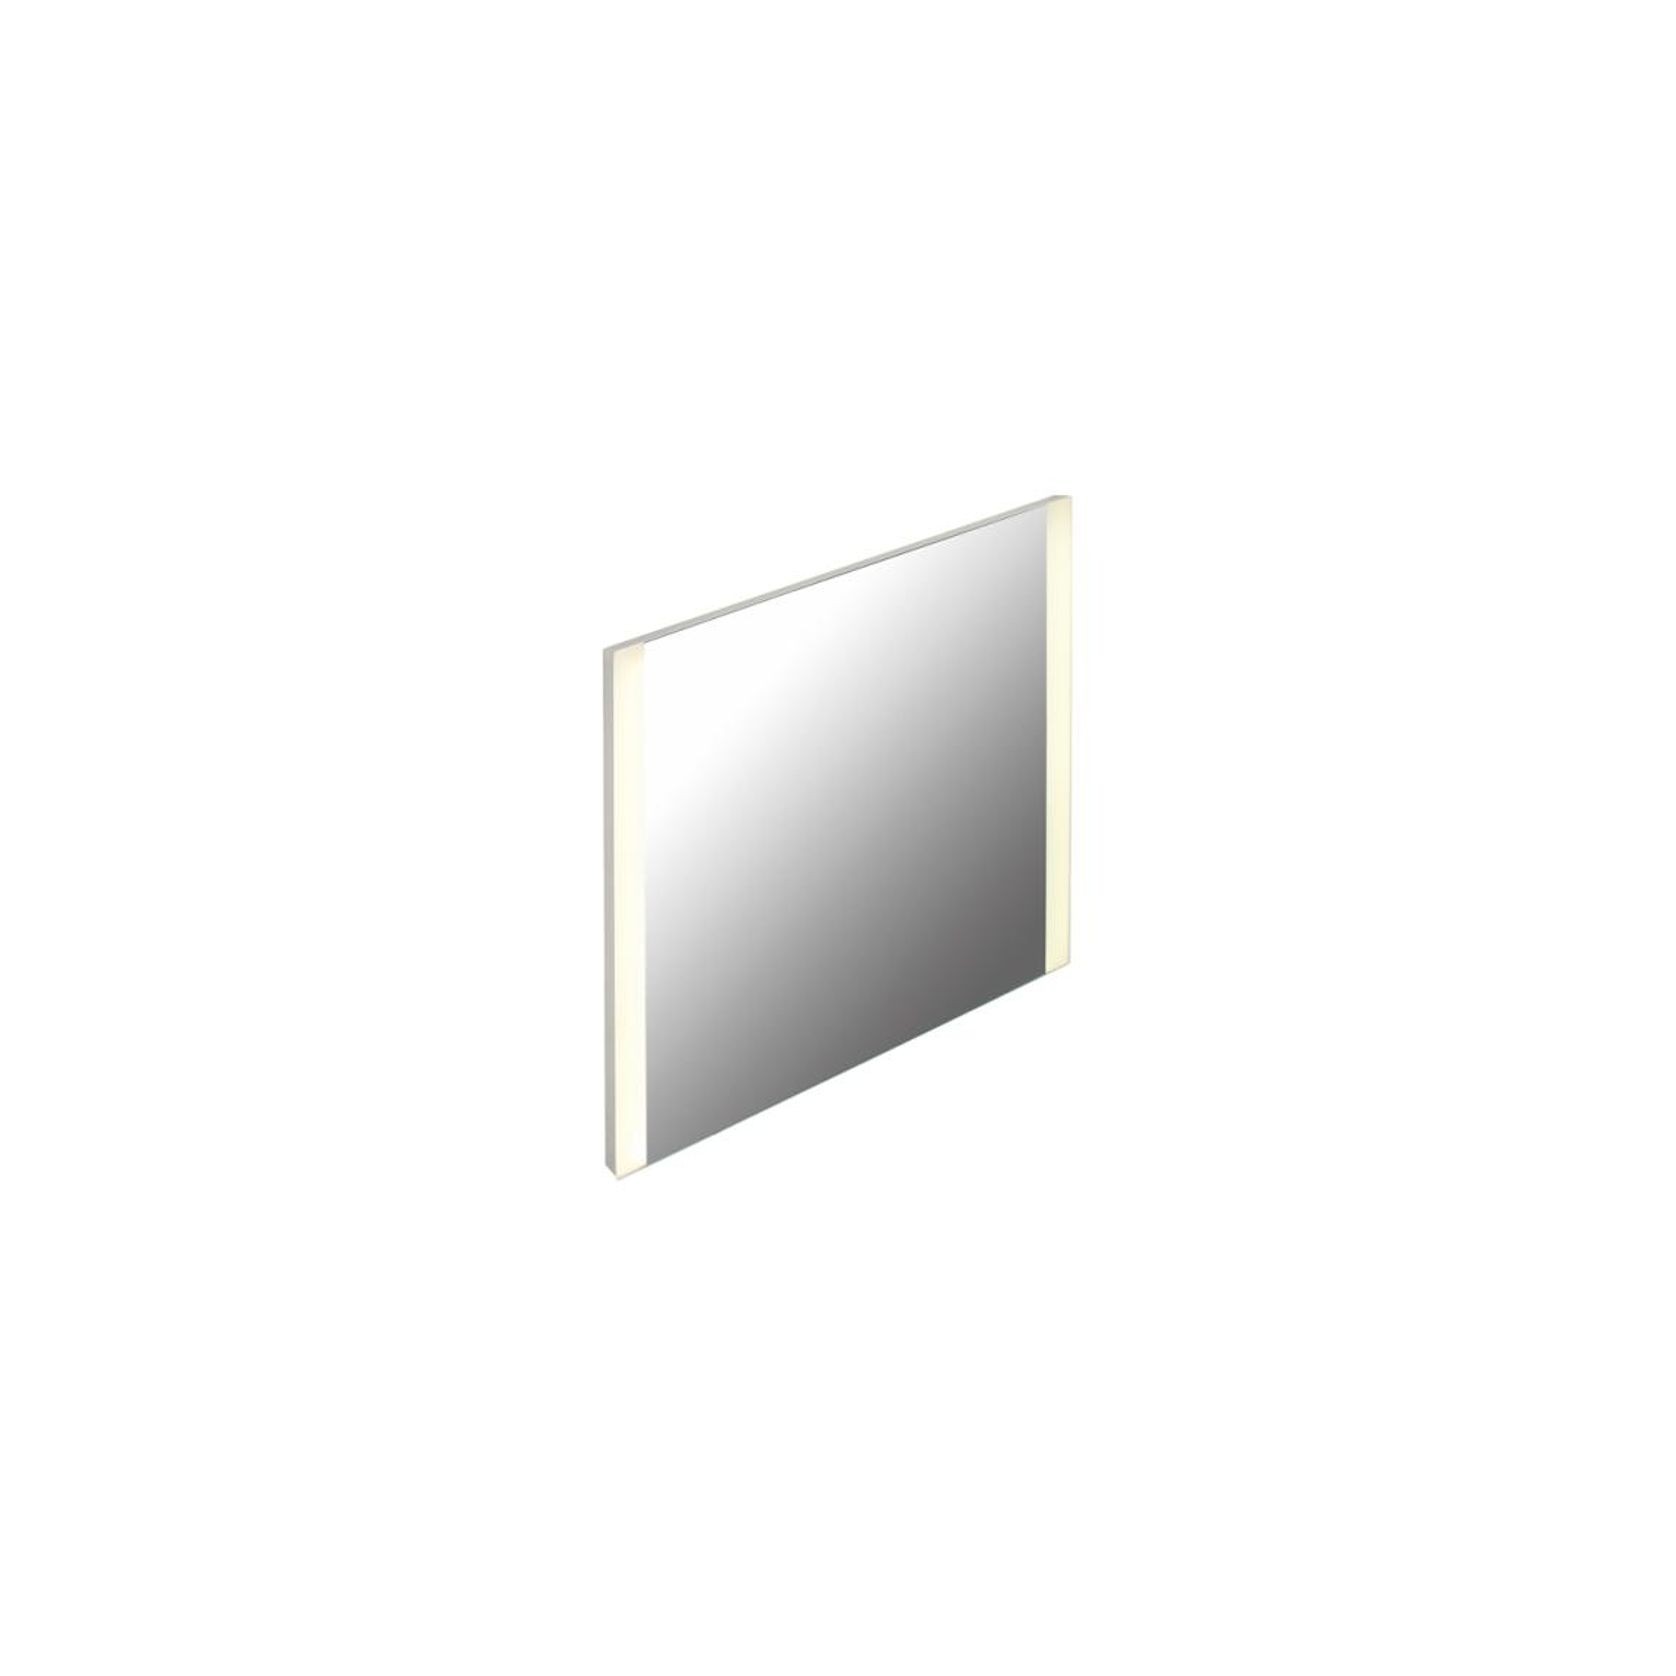 Hewi Mirrors Archipro Nz